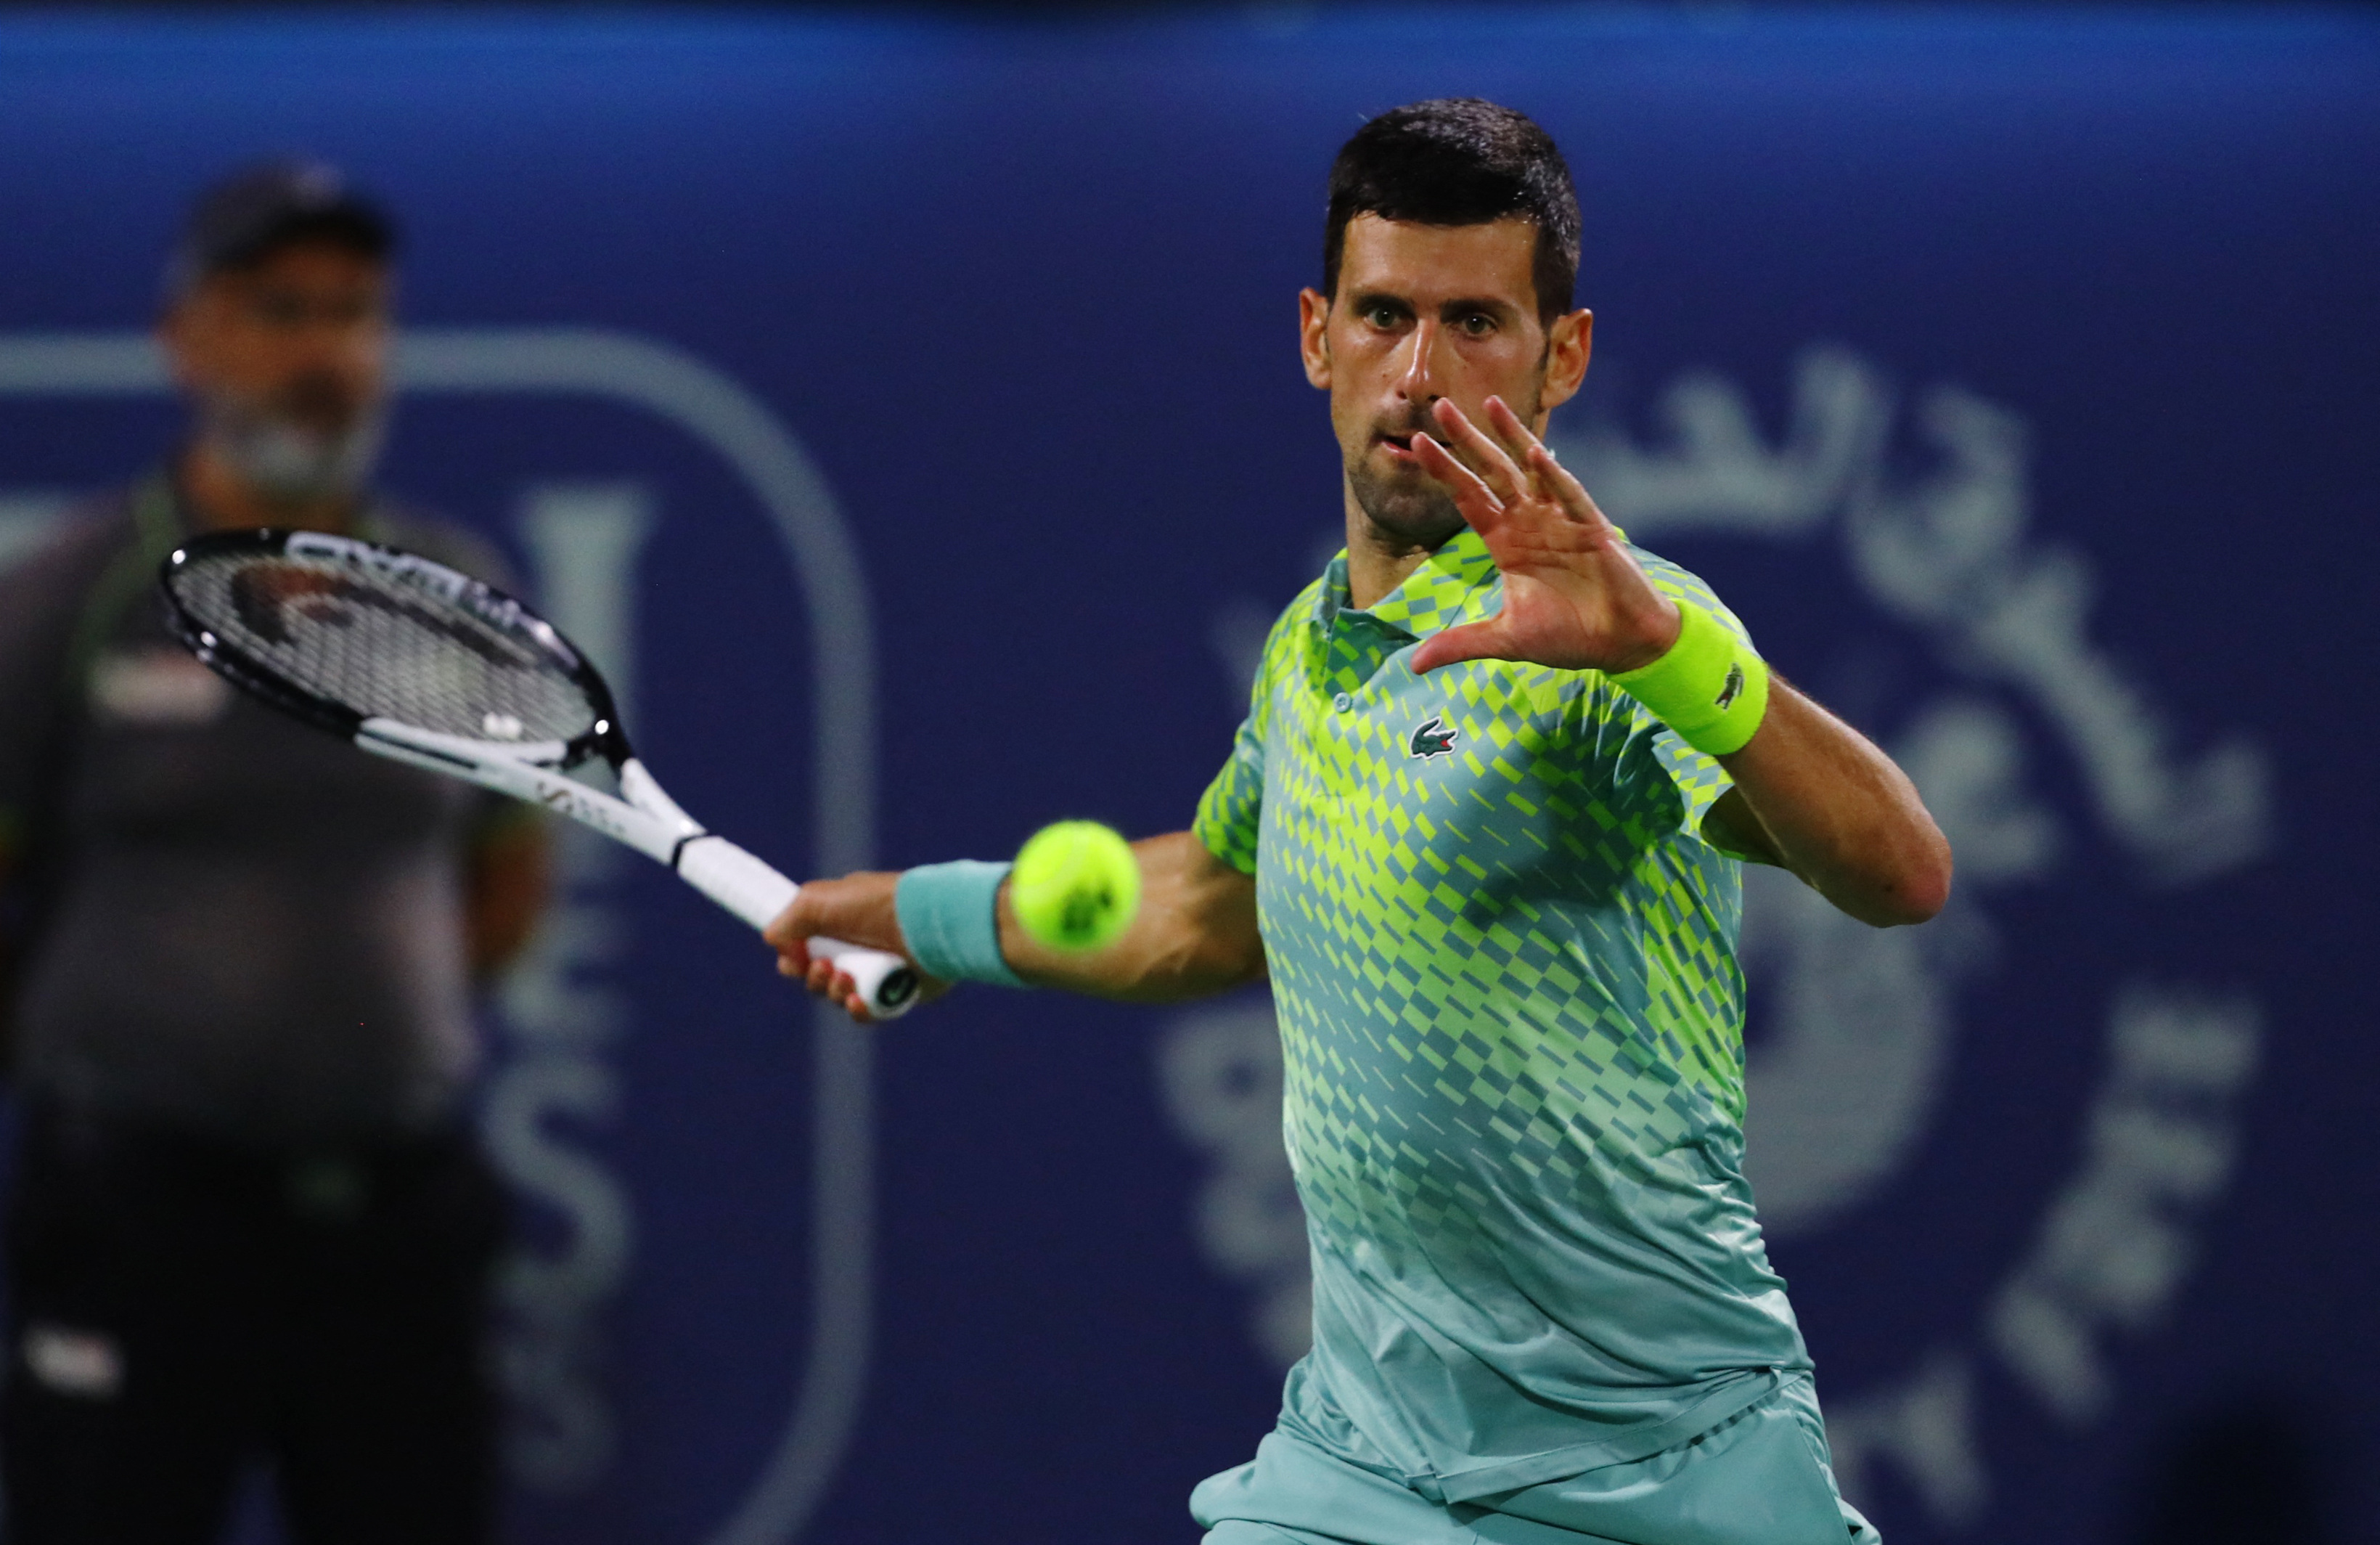 Djokovic labours to victory over Machac on return to action in Dubai